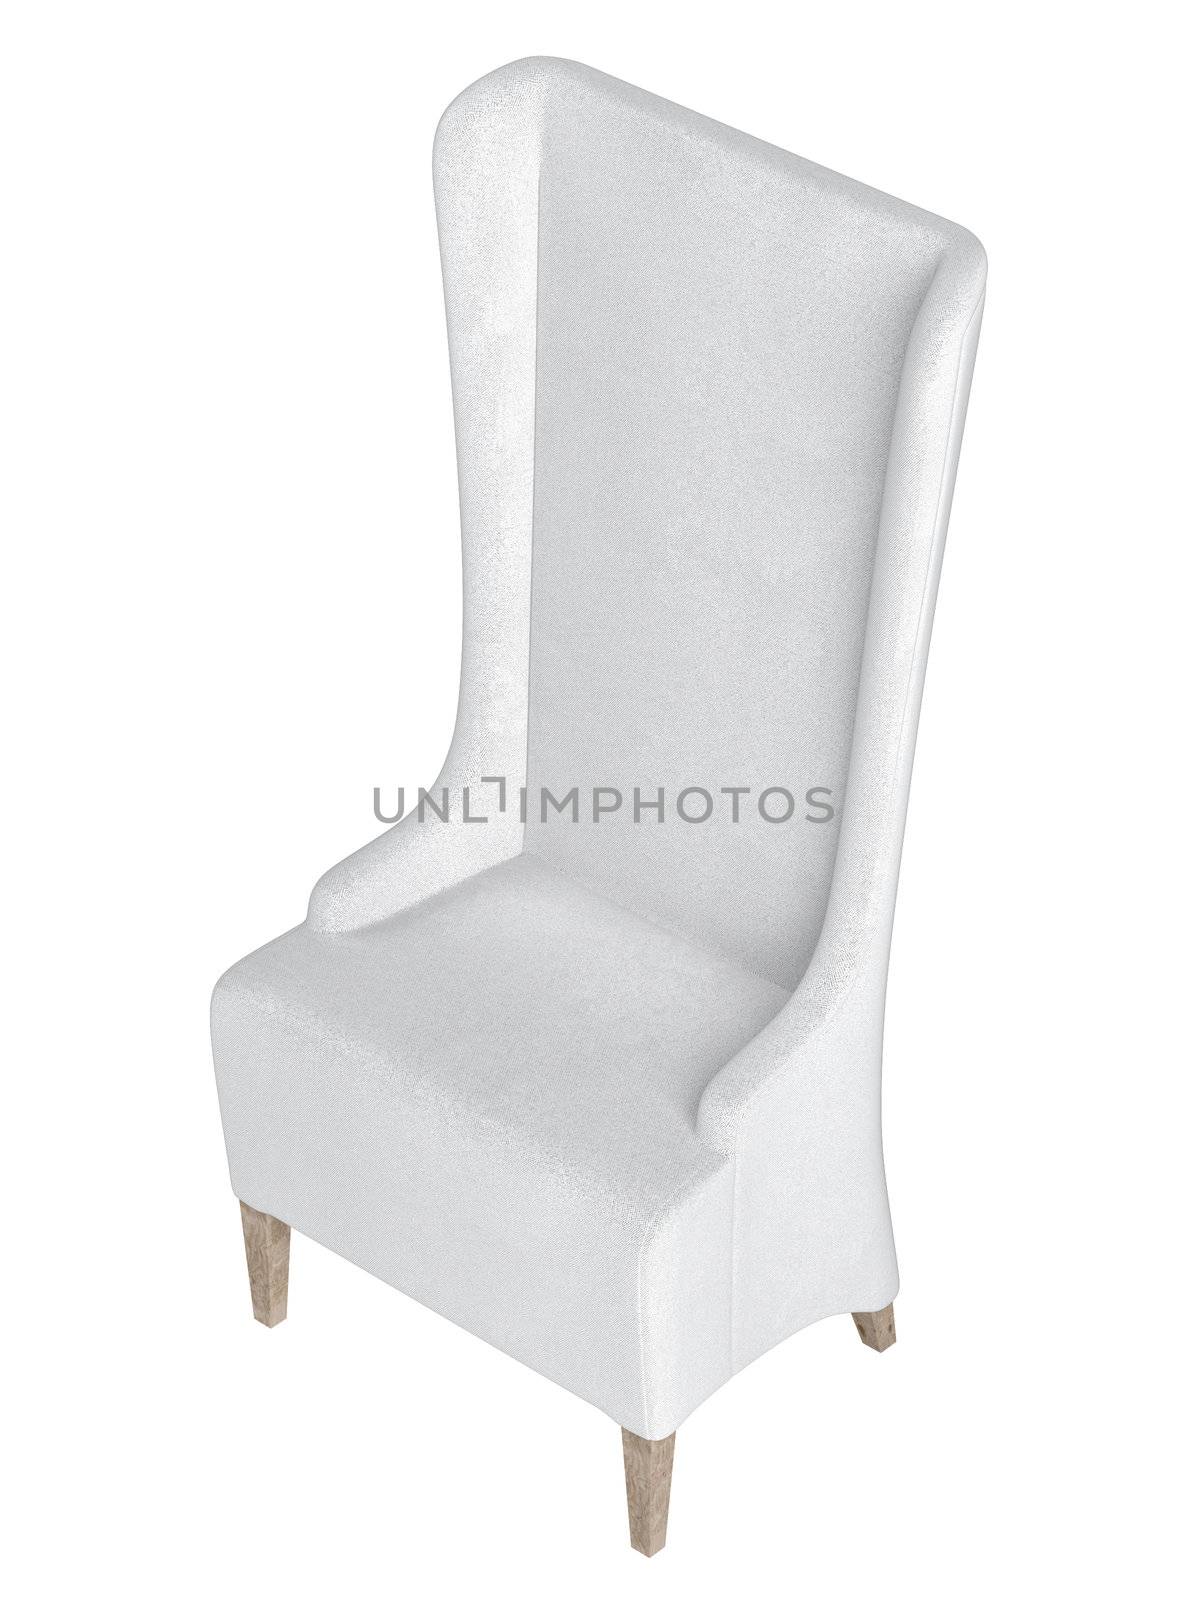 Modern design high backed upholstered armchair isolated on white to insert in your indoor decor